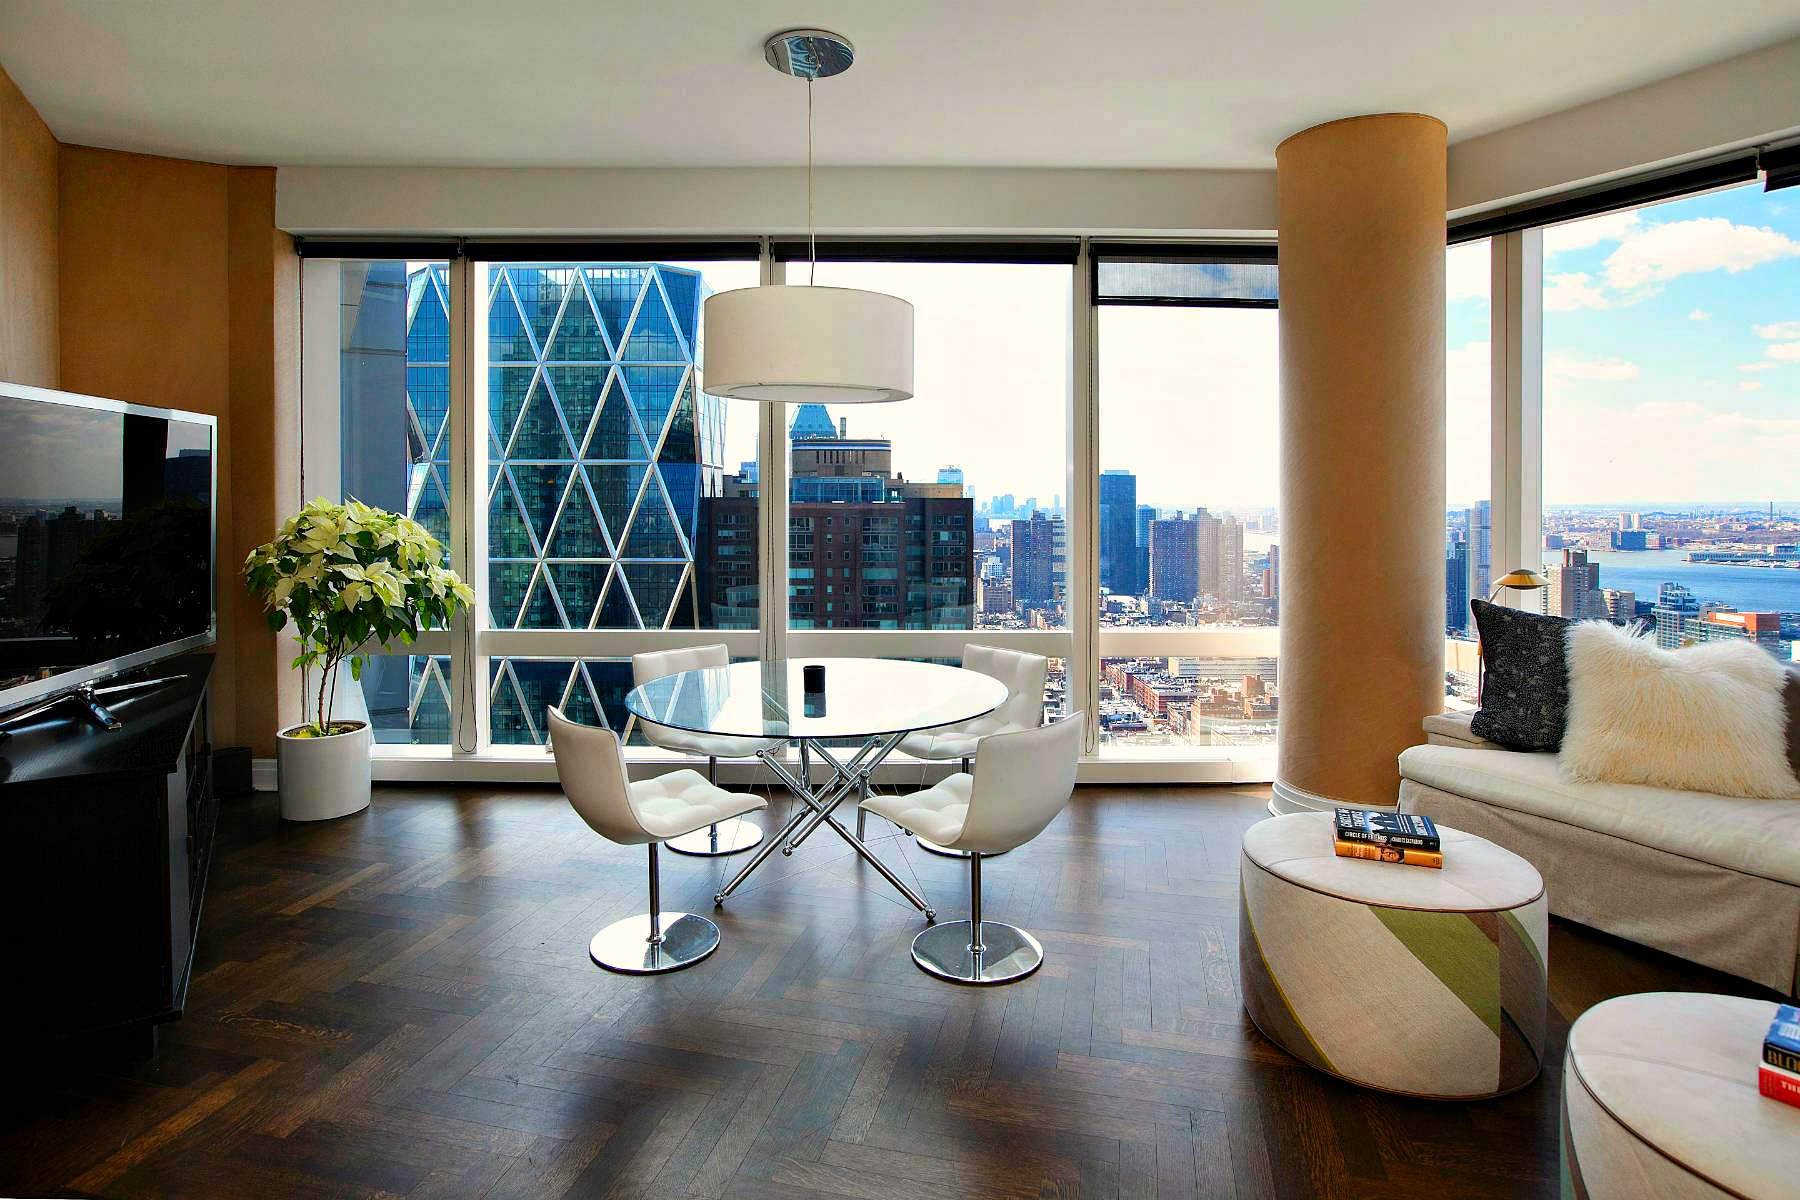 Listing of the Week: A Palace in the Sky at Time Warner Center